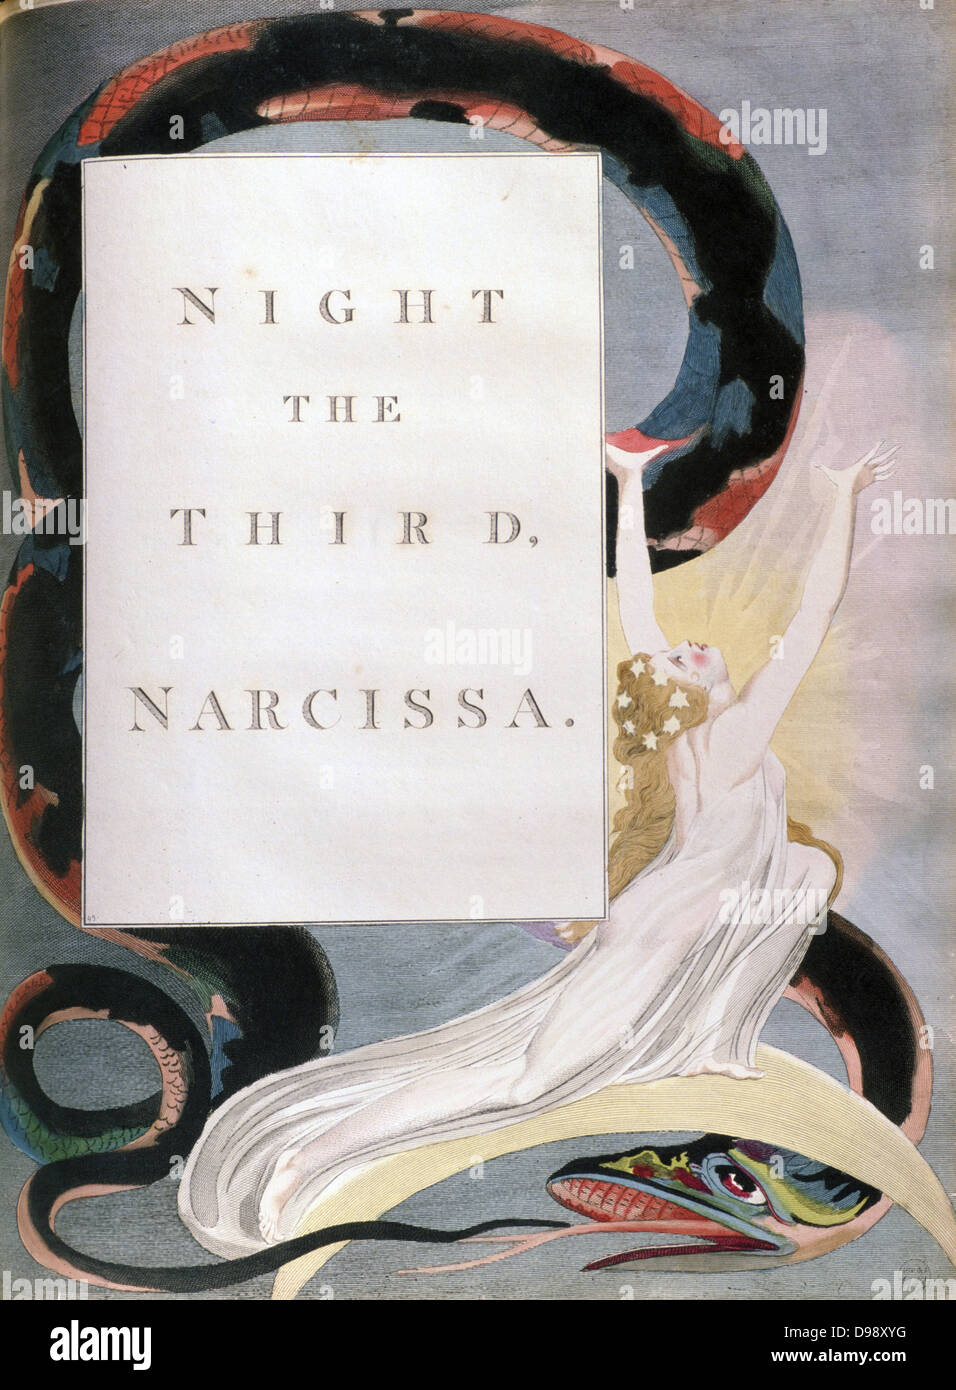 Illustration by William Blake (1757-1827) English poet, painter and printmaker, for Edward Young's (1681-1765) poem Night Thoughts published 1742-1745. Night the Third, Narcissa. Dedicated to Margaret Bentinck. Stock Photo